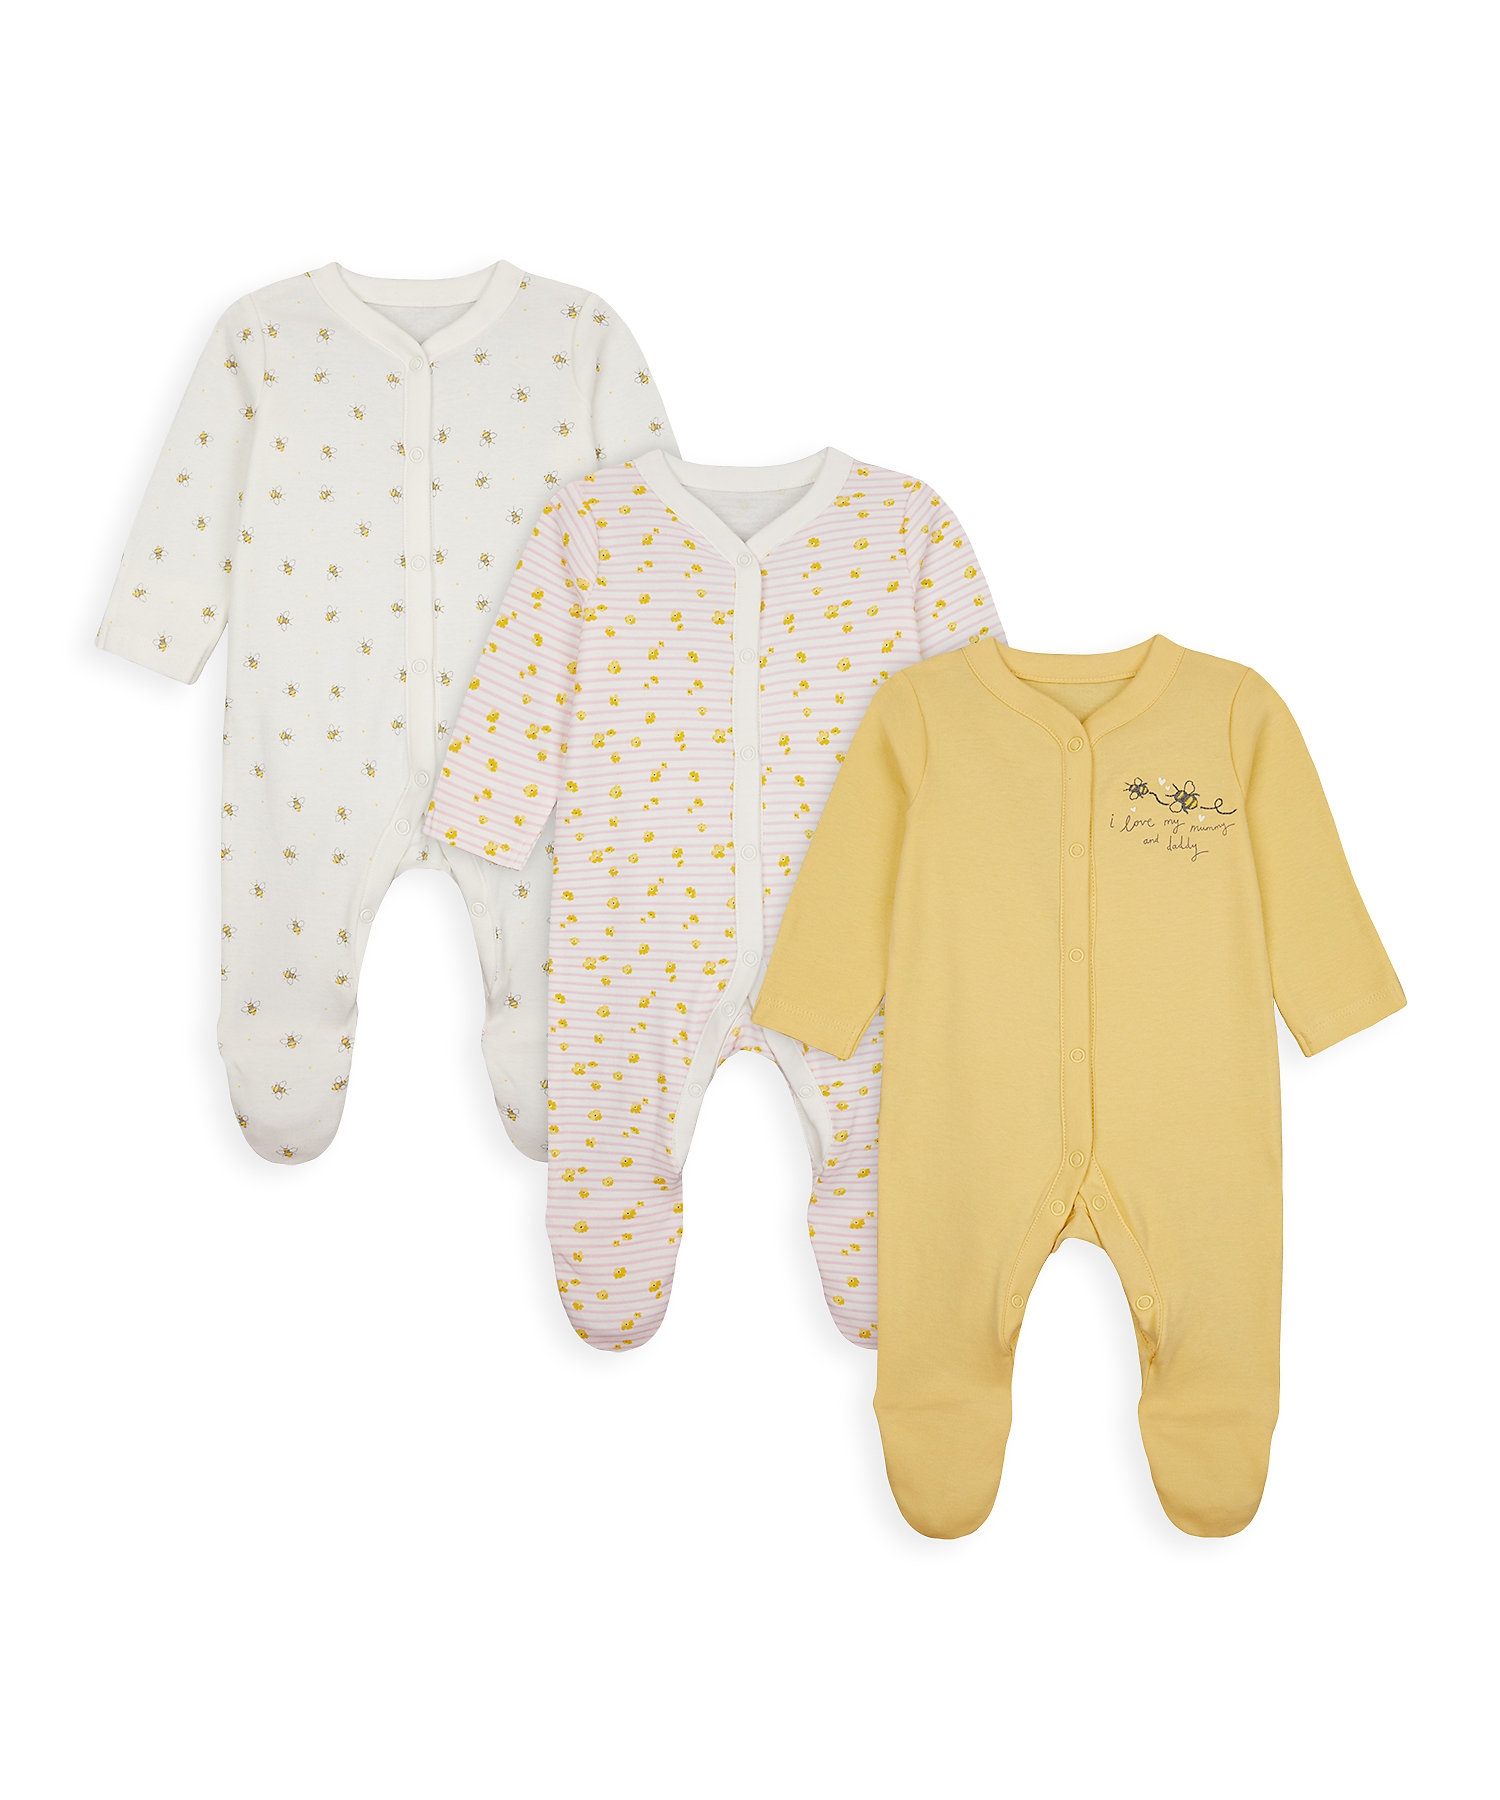 Mothercare | Girls Full Sleeves Sleepsuit Bee Embroidery - Pack Of 3 - Yellow Beige